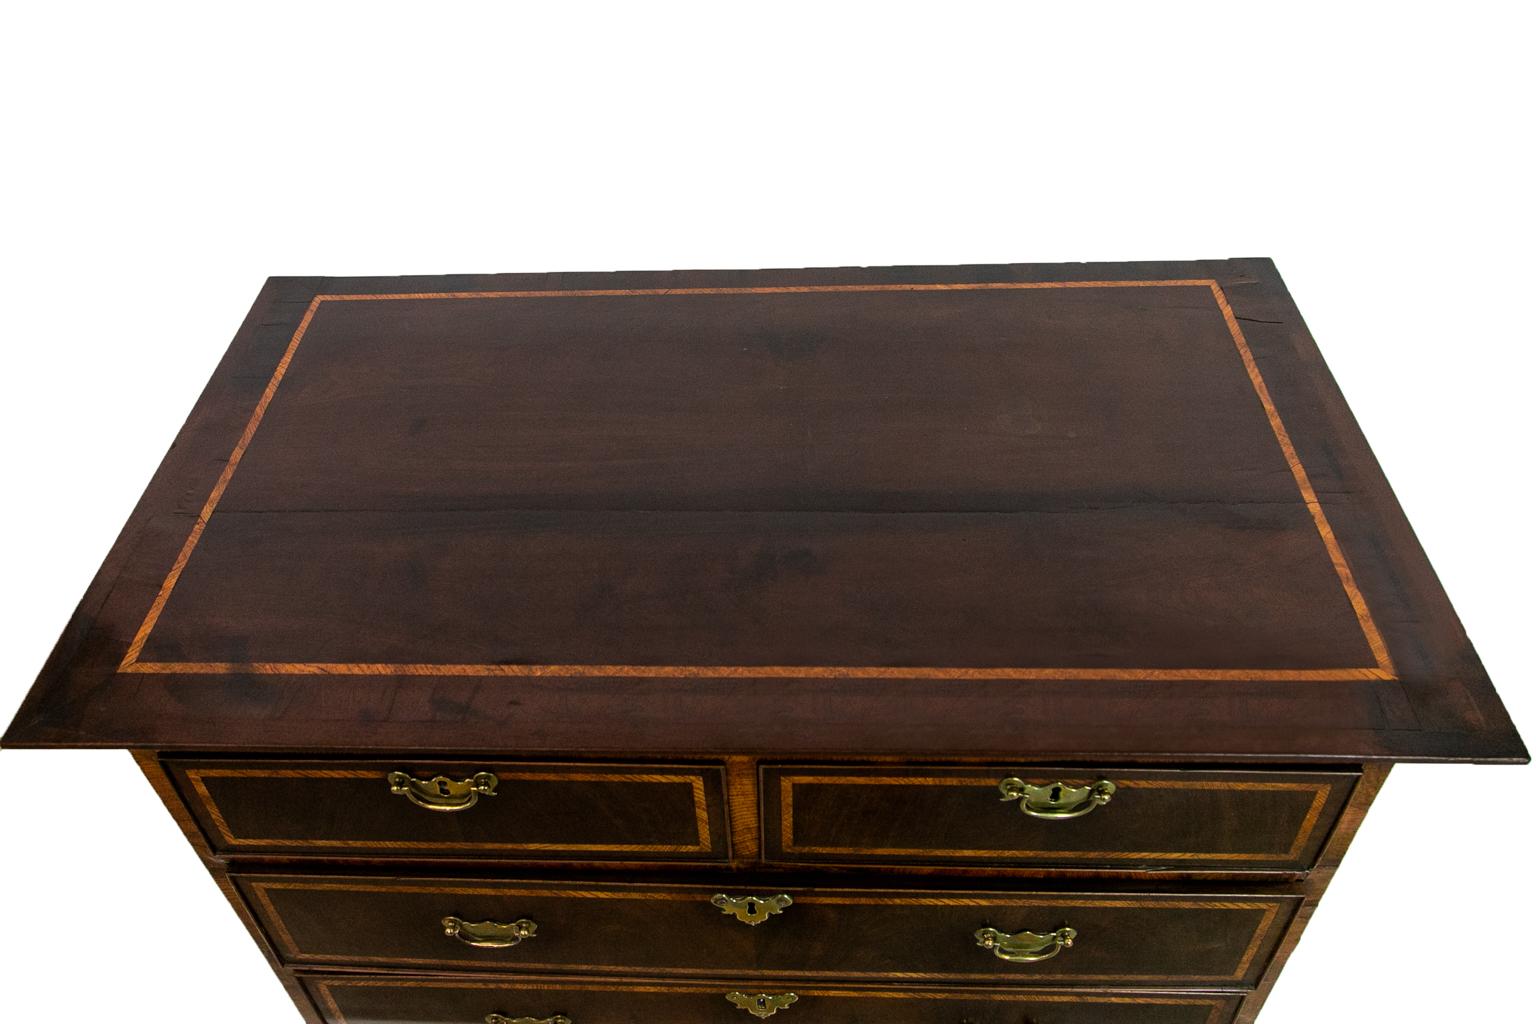 English George II chest, has the original hardware and is crossbanded with elm. There is some shrinkage cracking on the top.